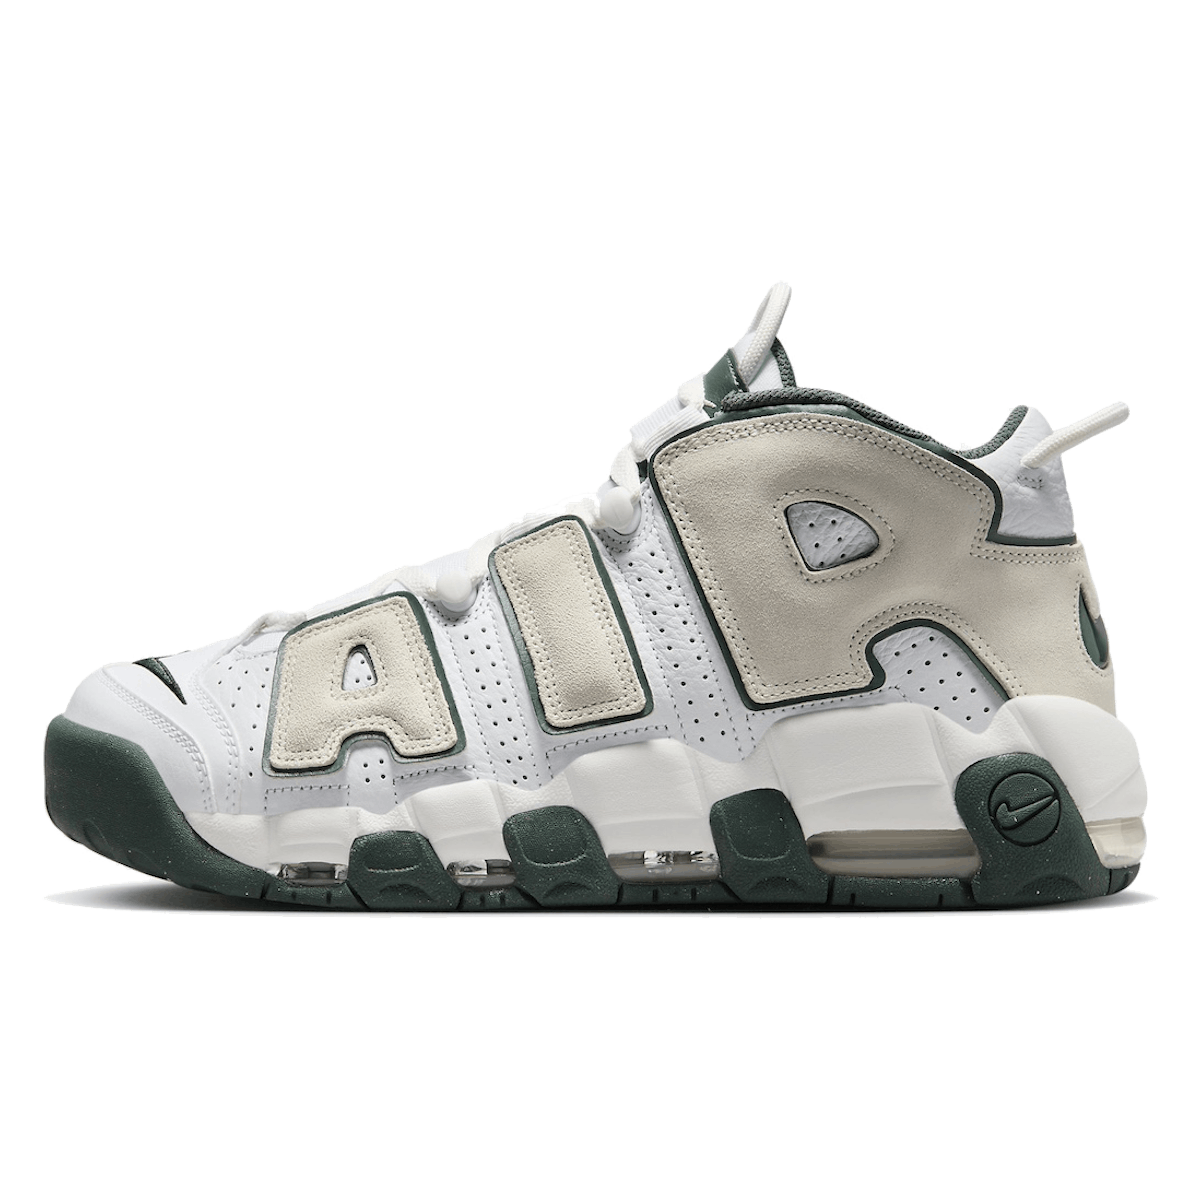 Nike Air More Uptempo "Vintage Green"